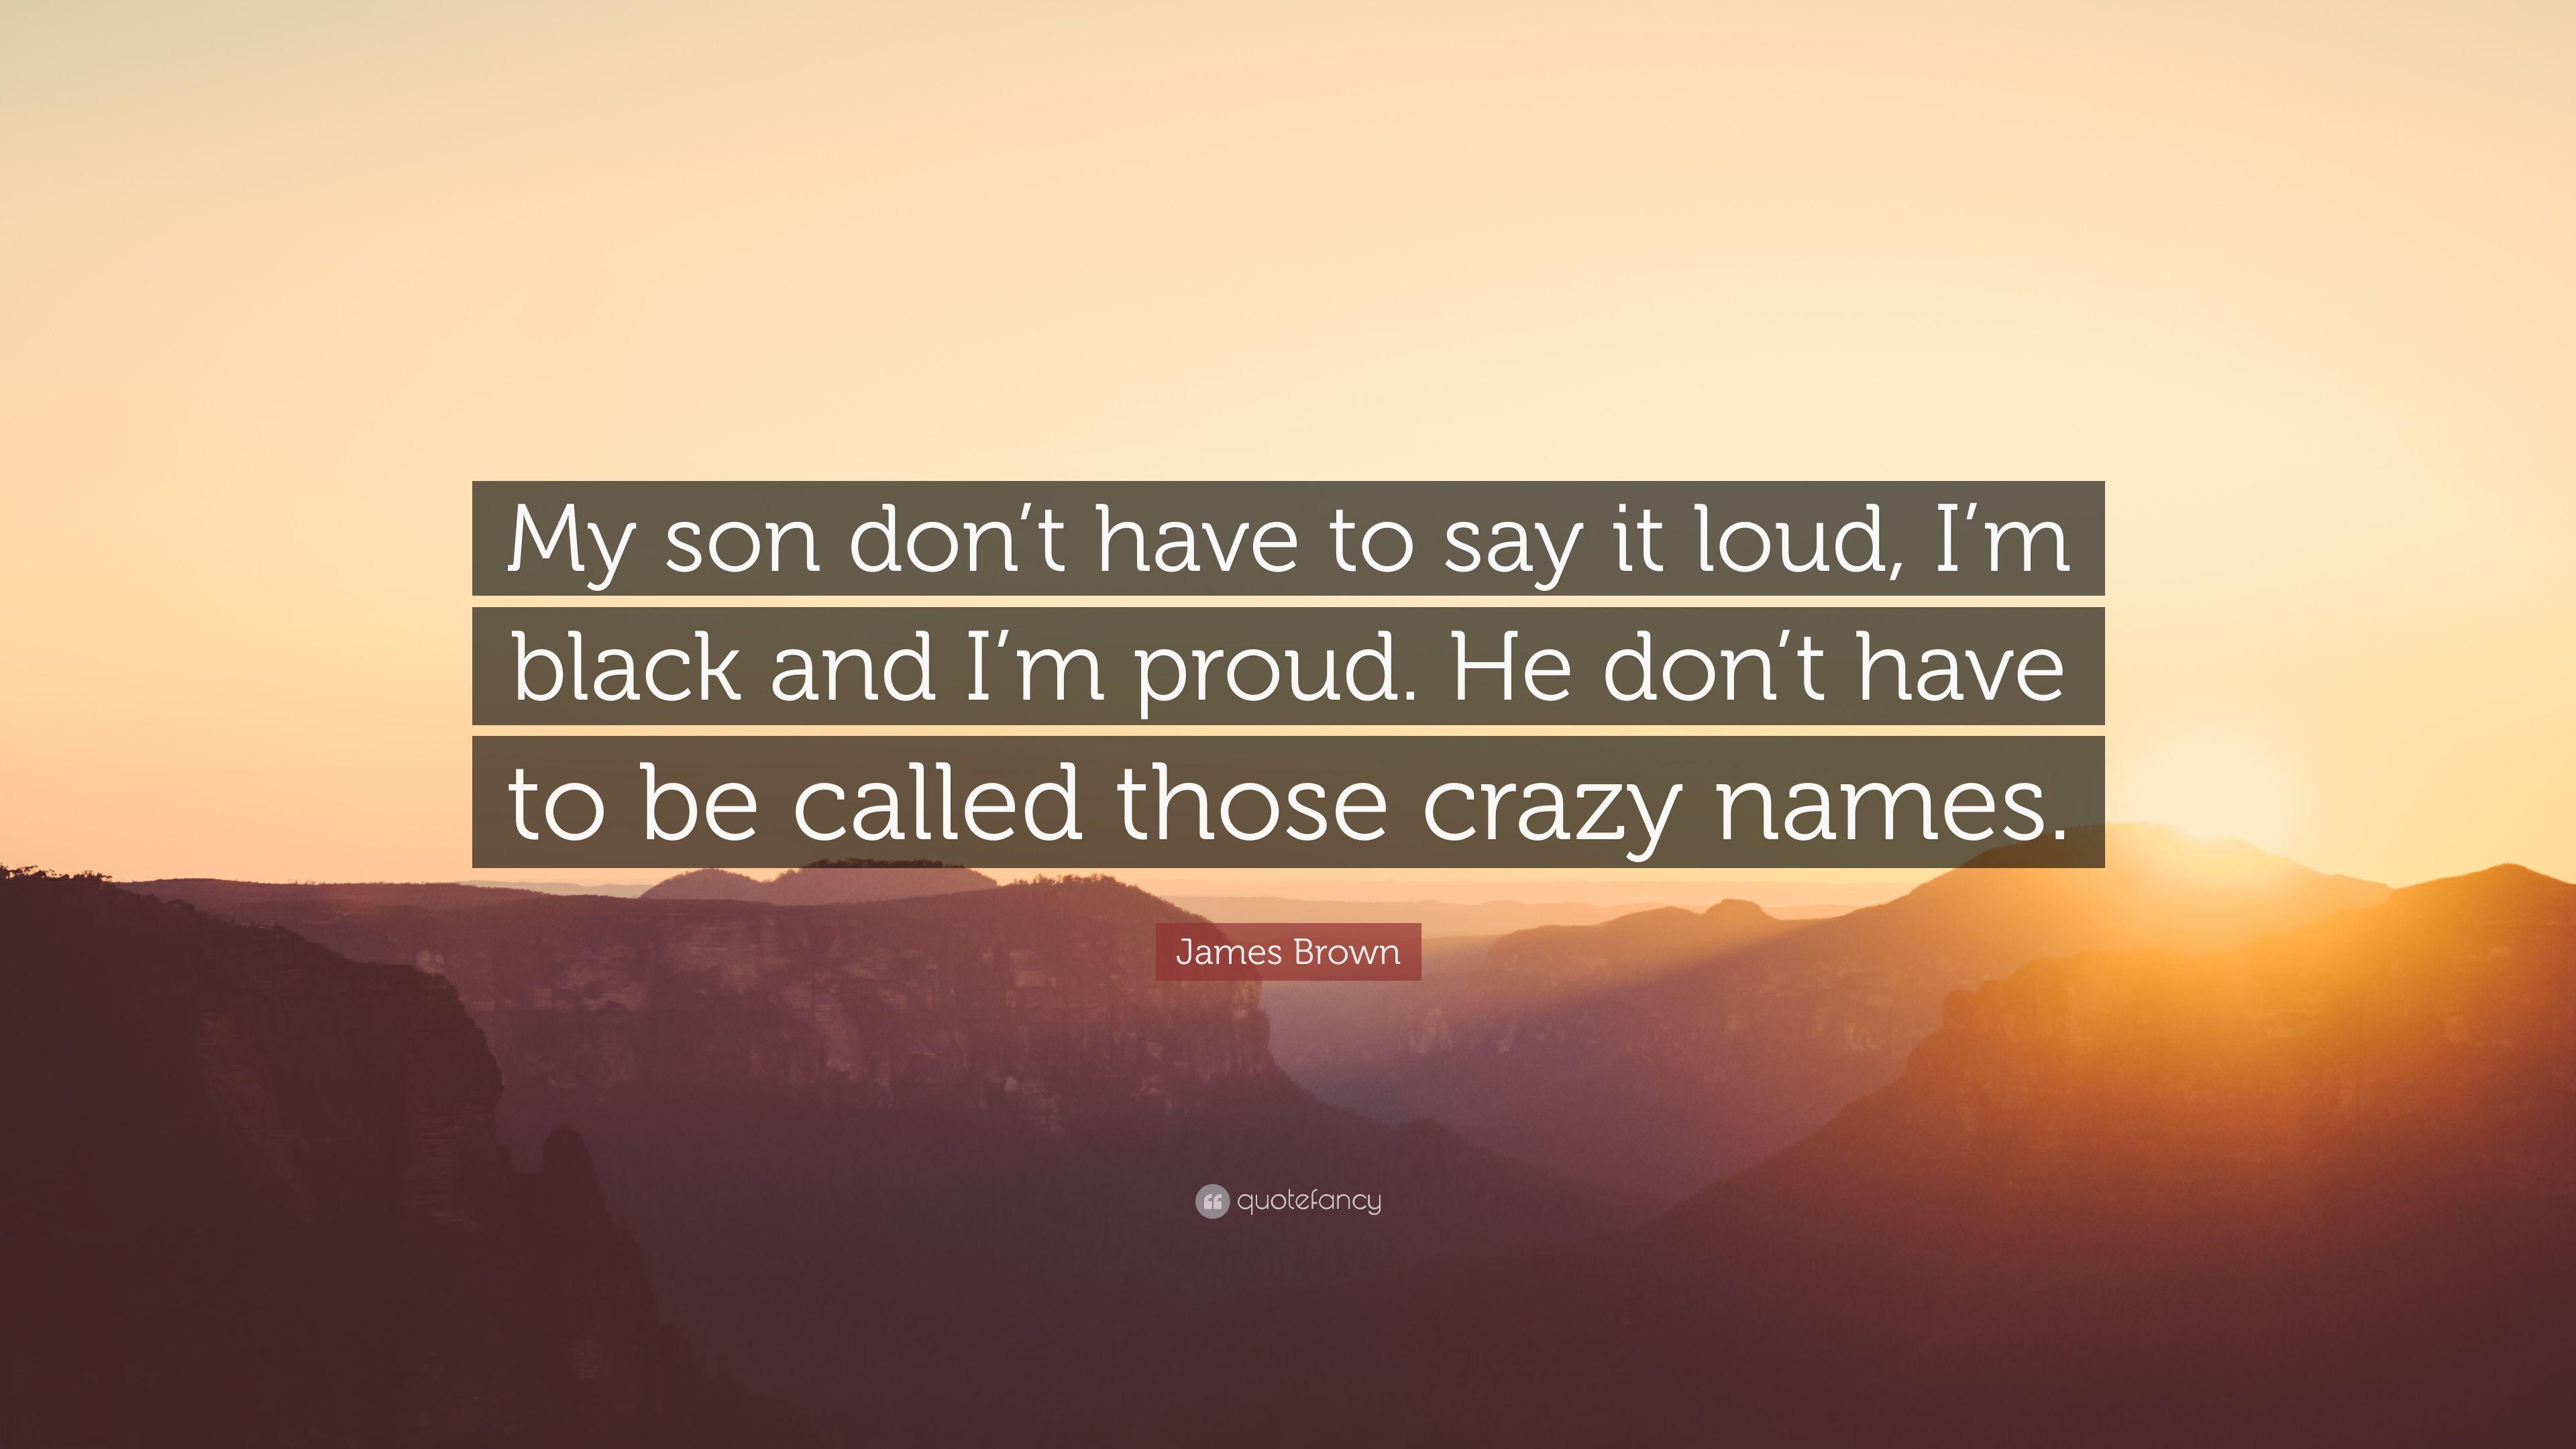 James Brown Quote: “My son don't have to say it loud, I'm black